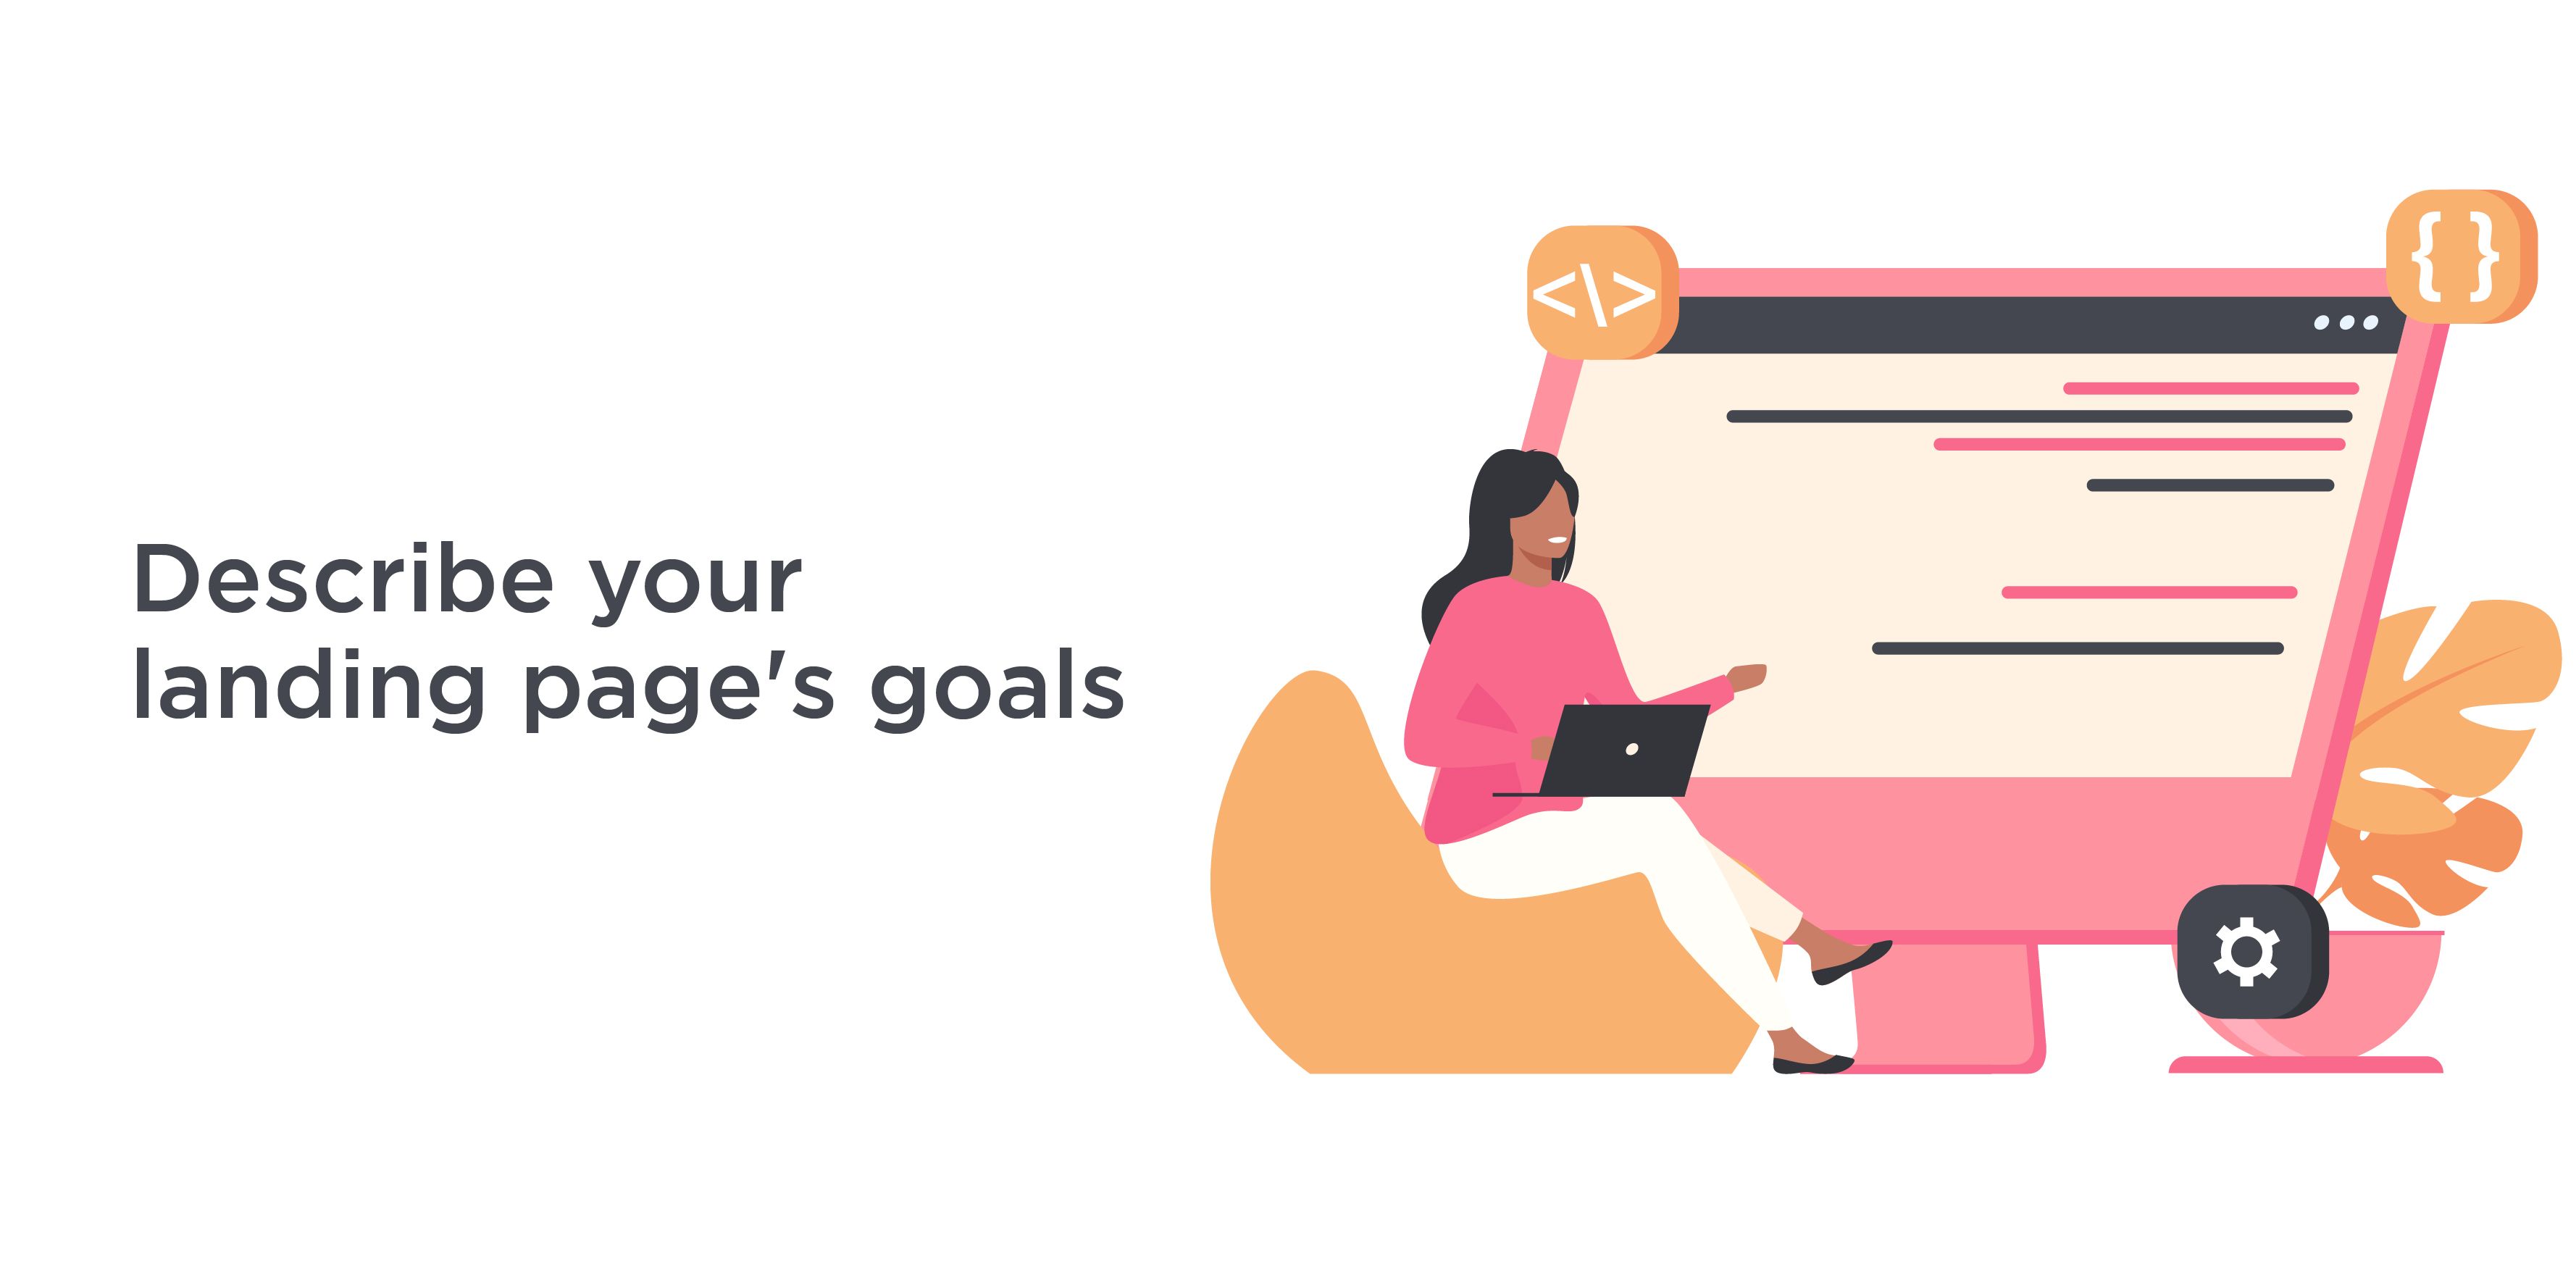 Describe your landing page's goals.